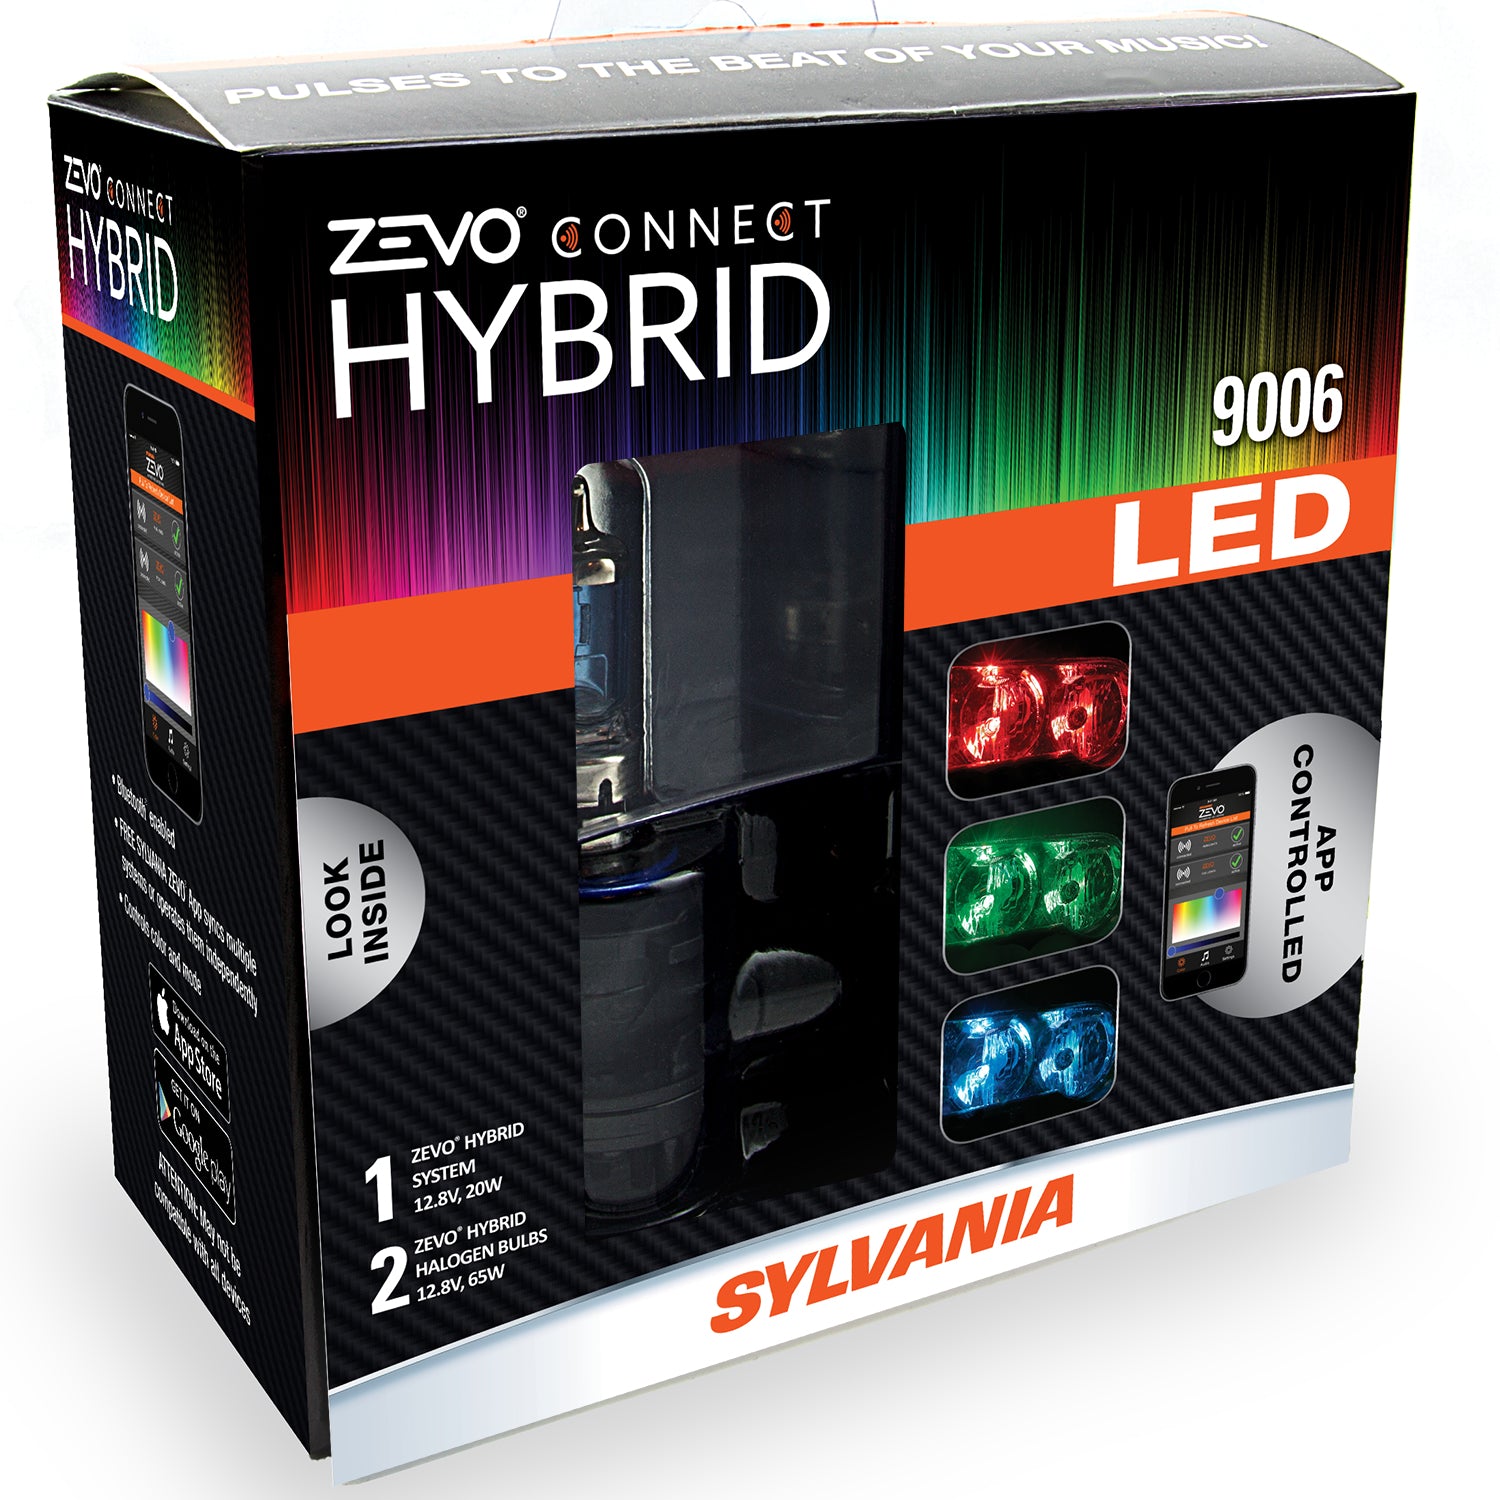 2-PK SYLVANIA 9006 ZEVO Connect Hybrid LED Color Changing System for Headlights